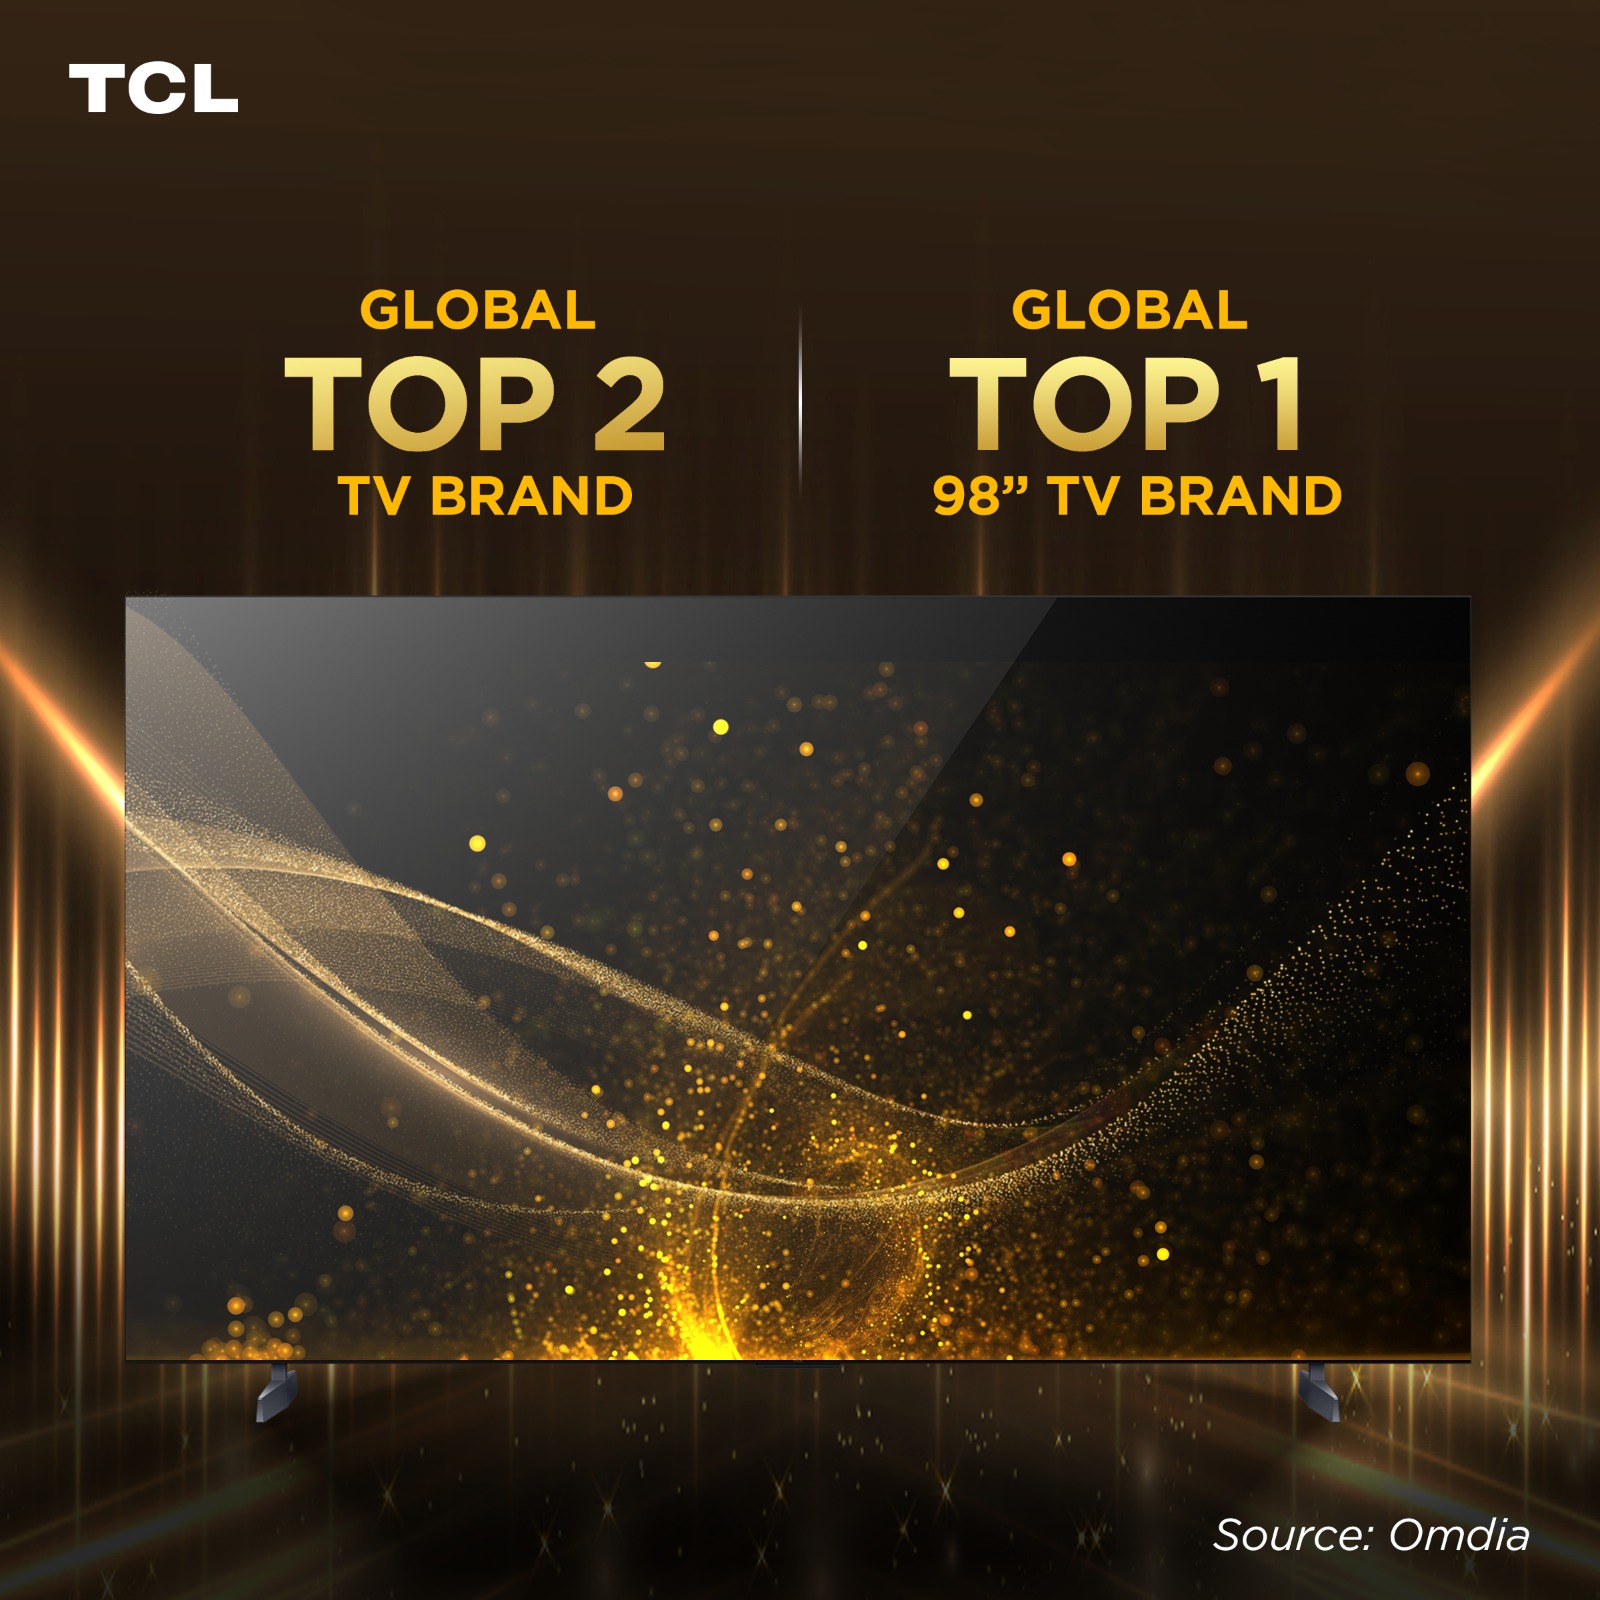 TCL Ranked as Global Top 2 TV Brand and No. 1 in 98'' TV Category for Two Consecutive Years